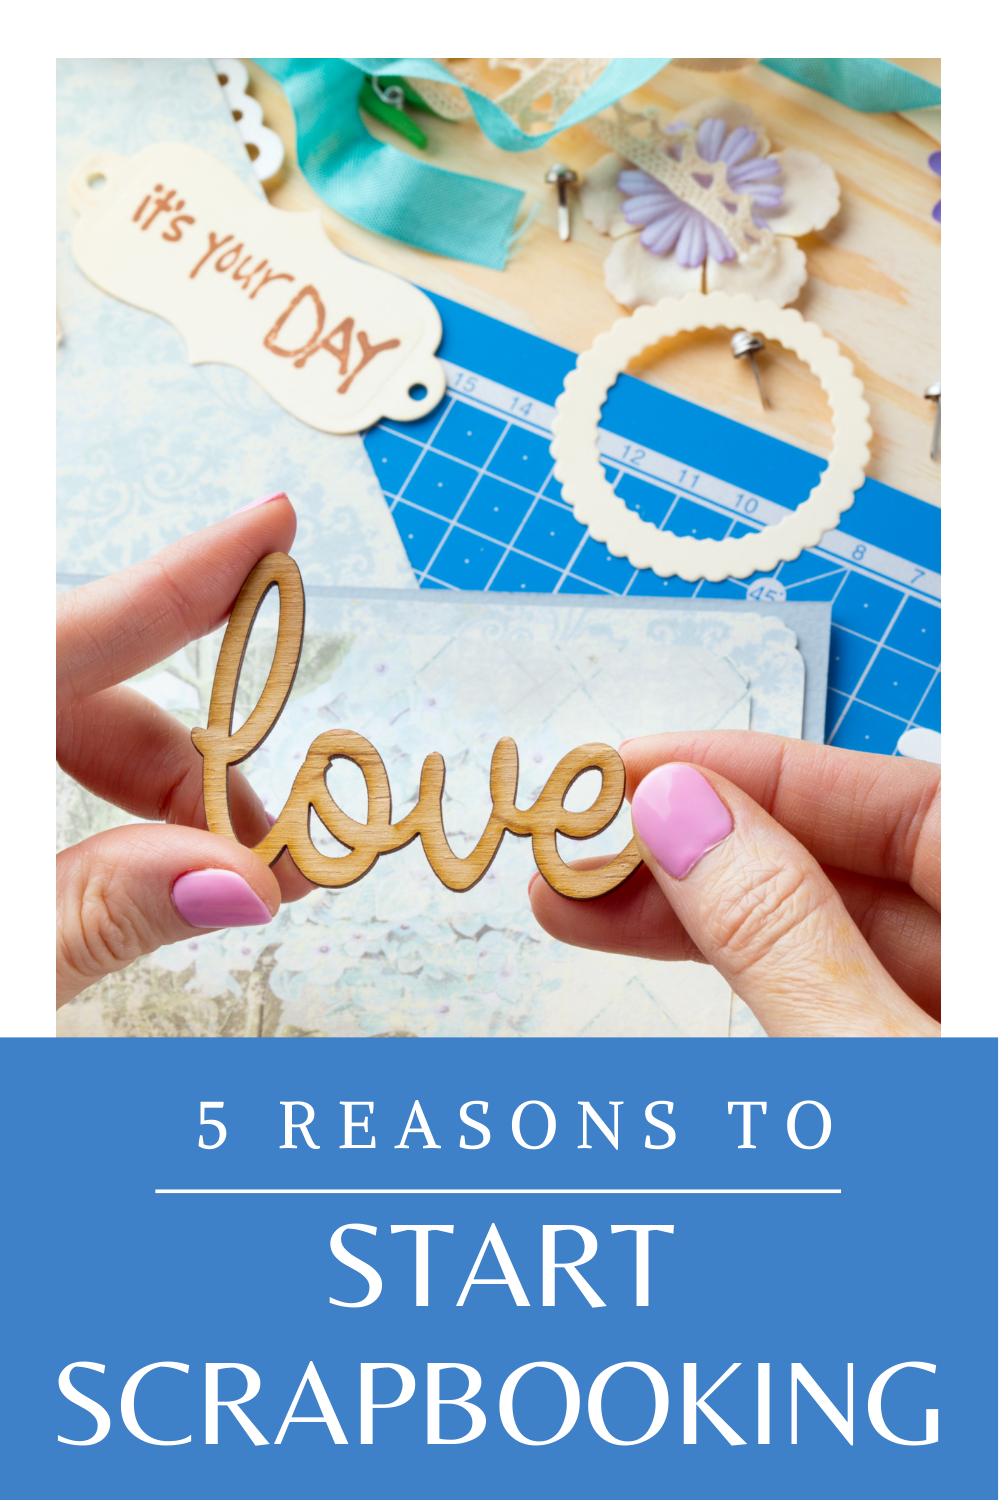 Reviving the Family Photo Album Tradition: 5 Reasons You Should Start Scrapbooking